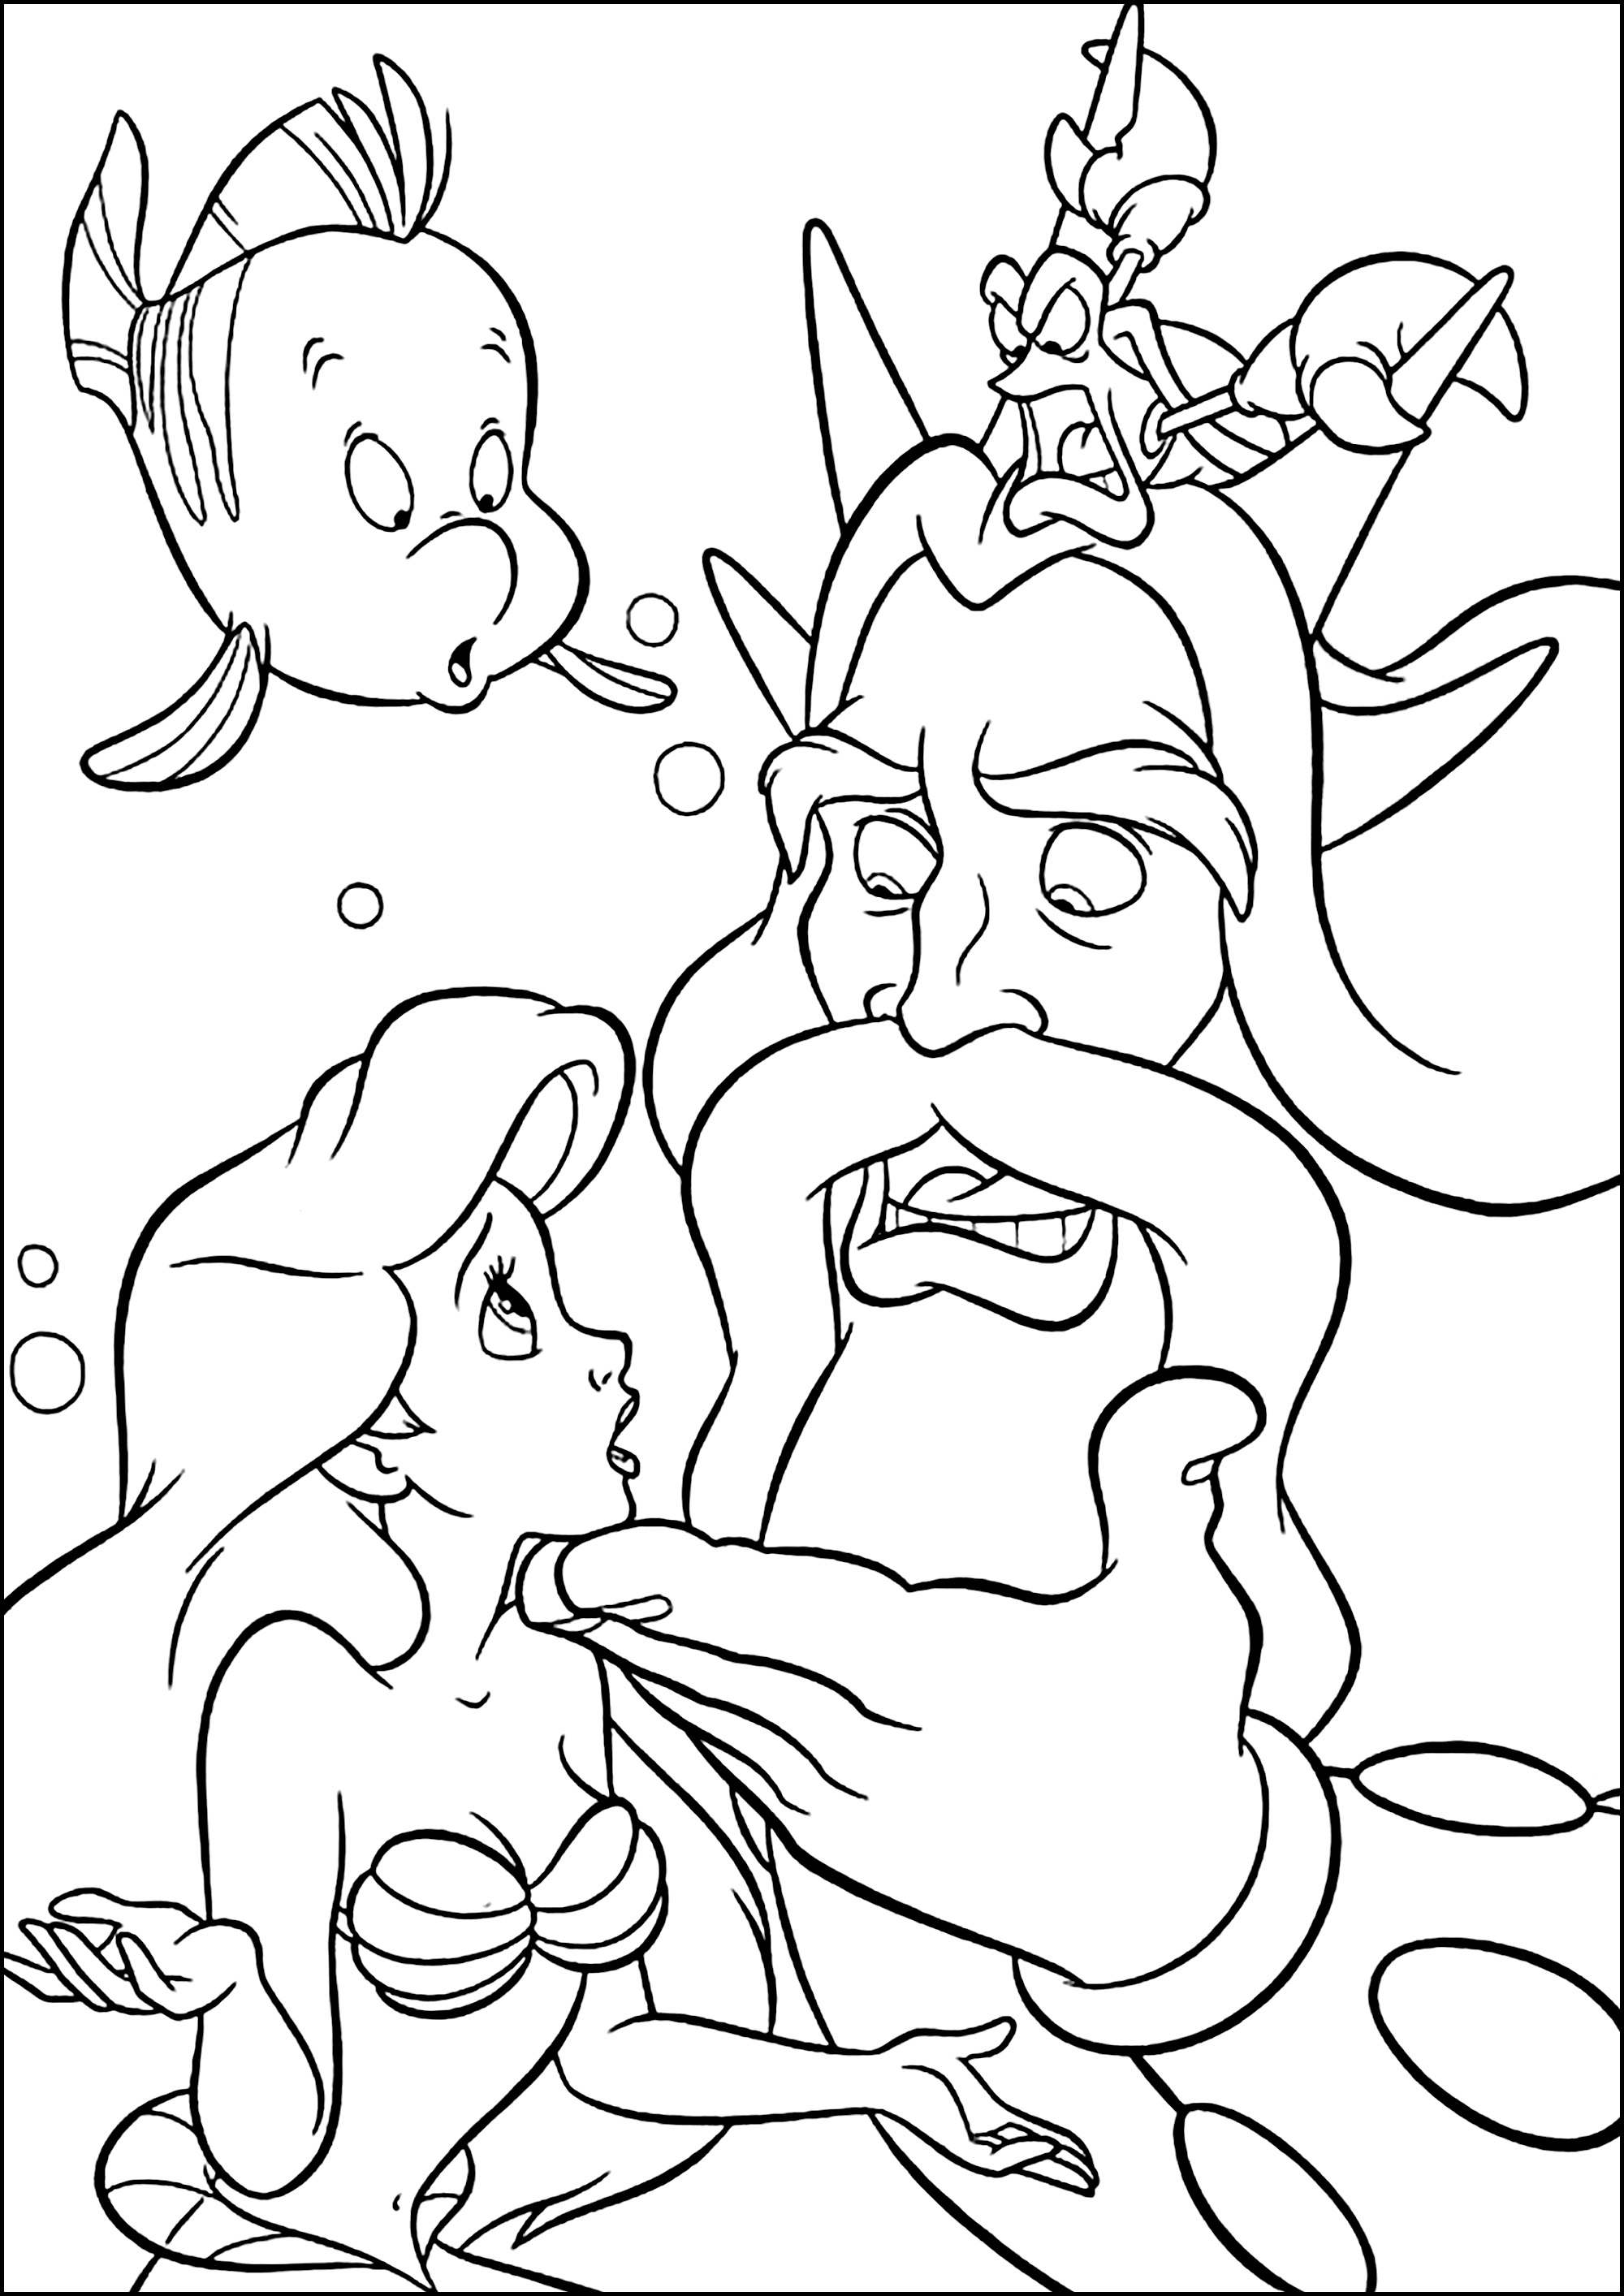 Coloring page of Ariel with her father The Triton King